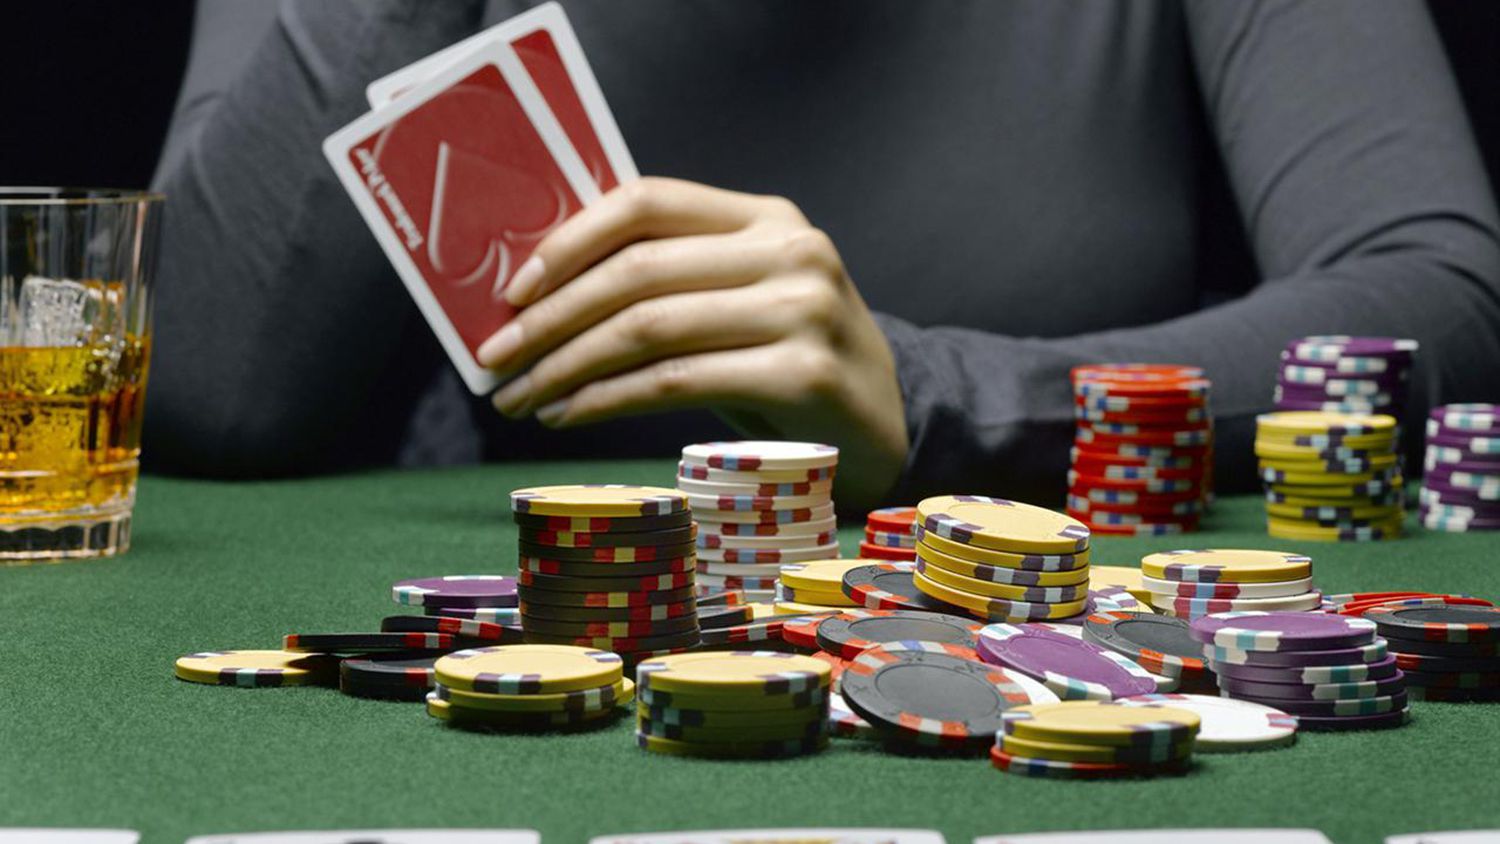 Man playing poker with stack of chips